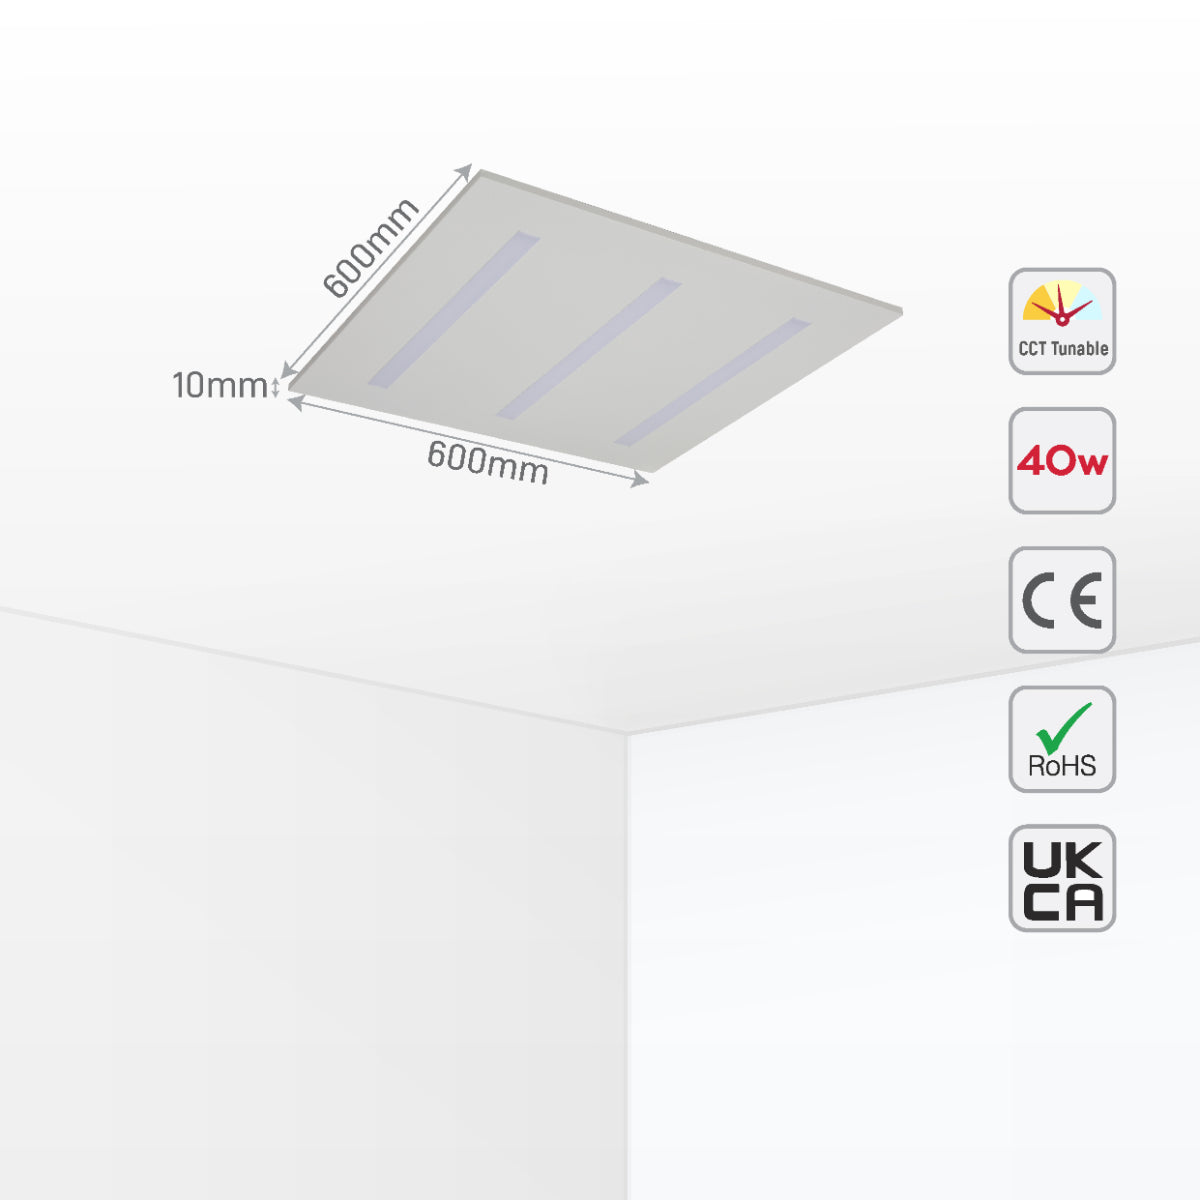 Size and certifications of LuminEssence OfficePro LED Panel Light 40W 4000lm 600x600 3CCT 165-015058